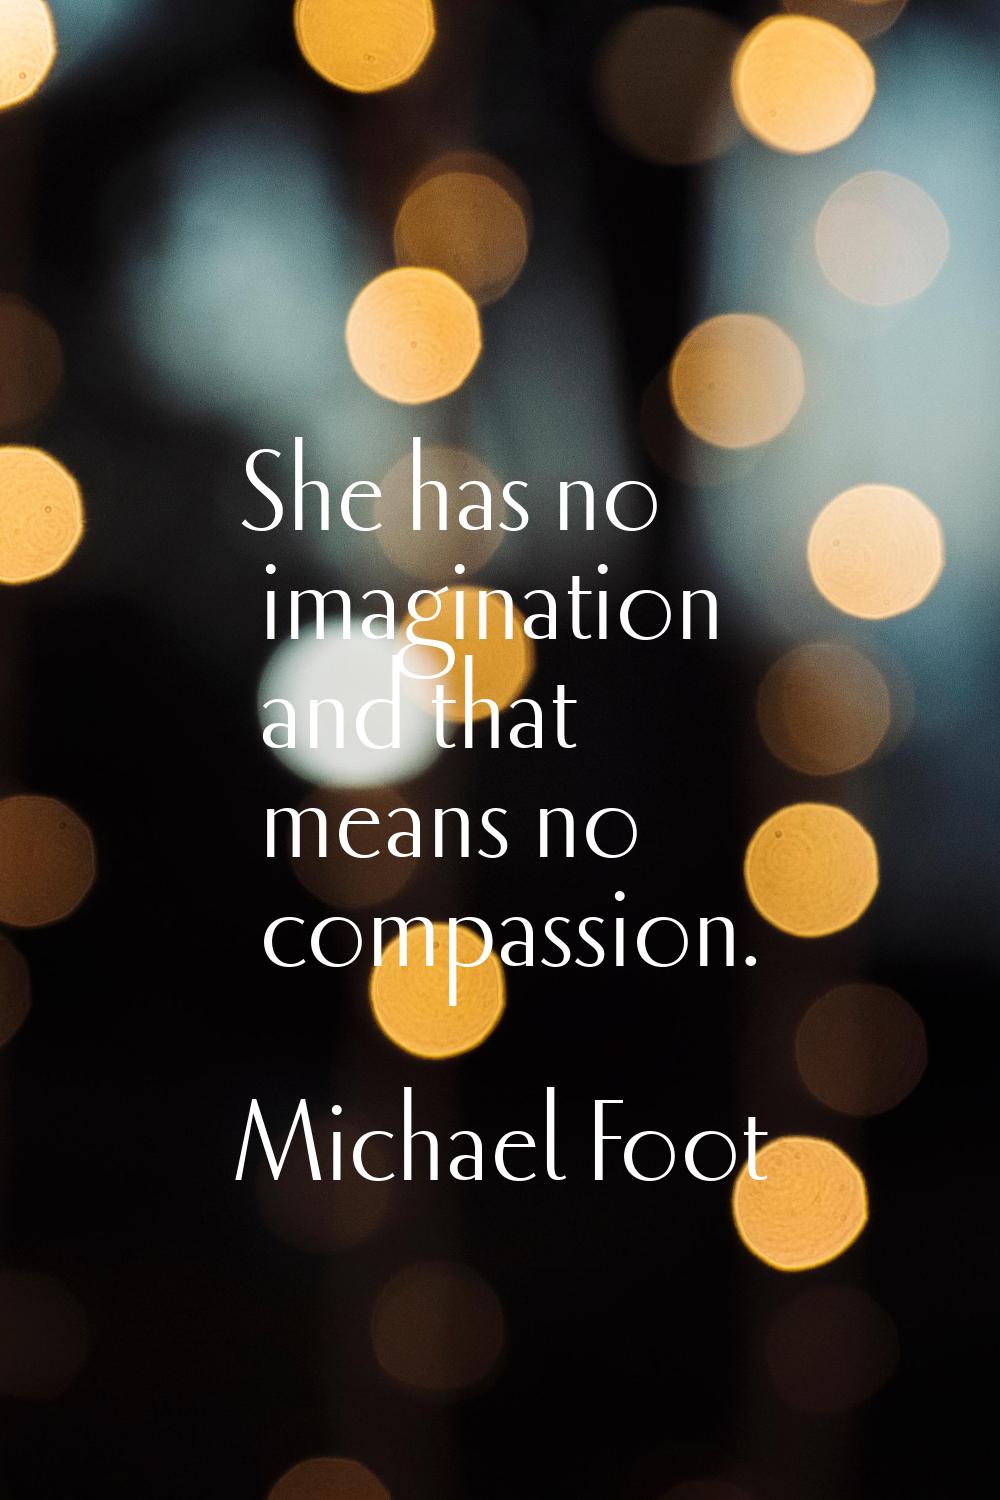 She has no imagination and that means no compassion.